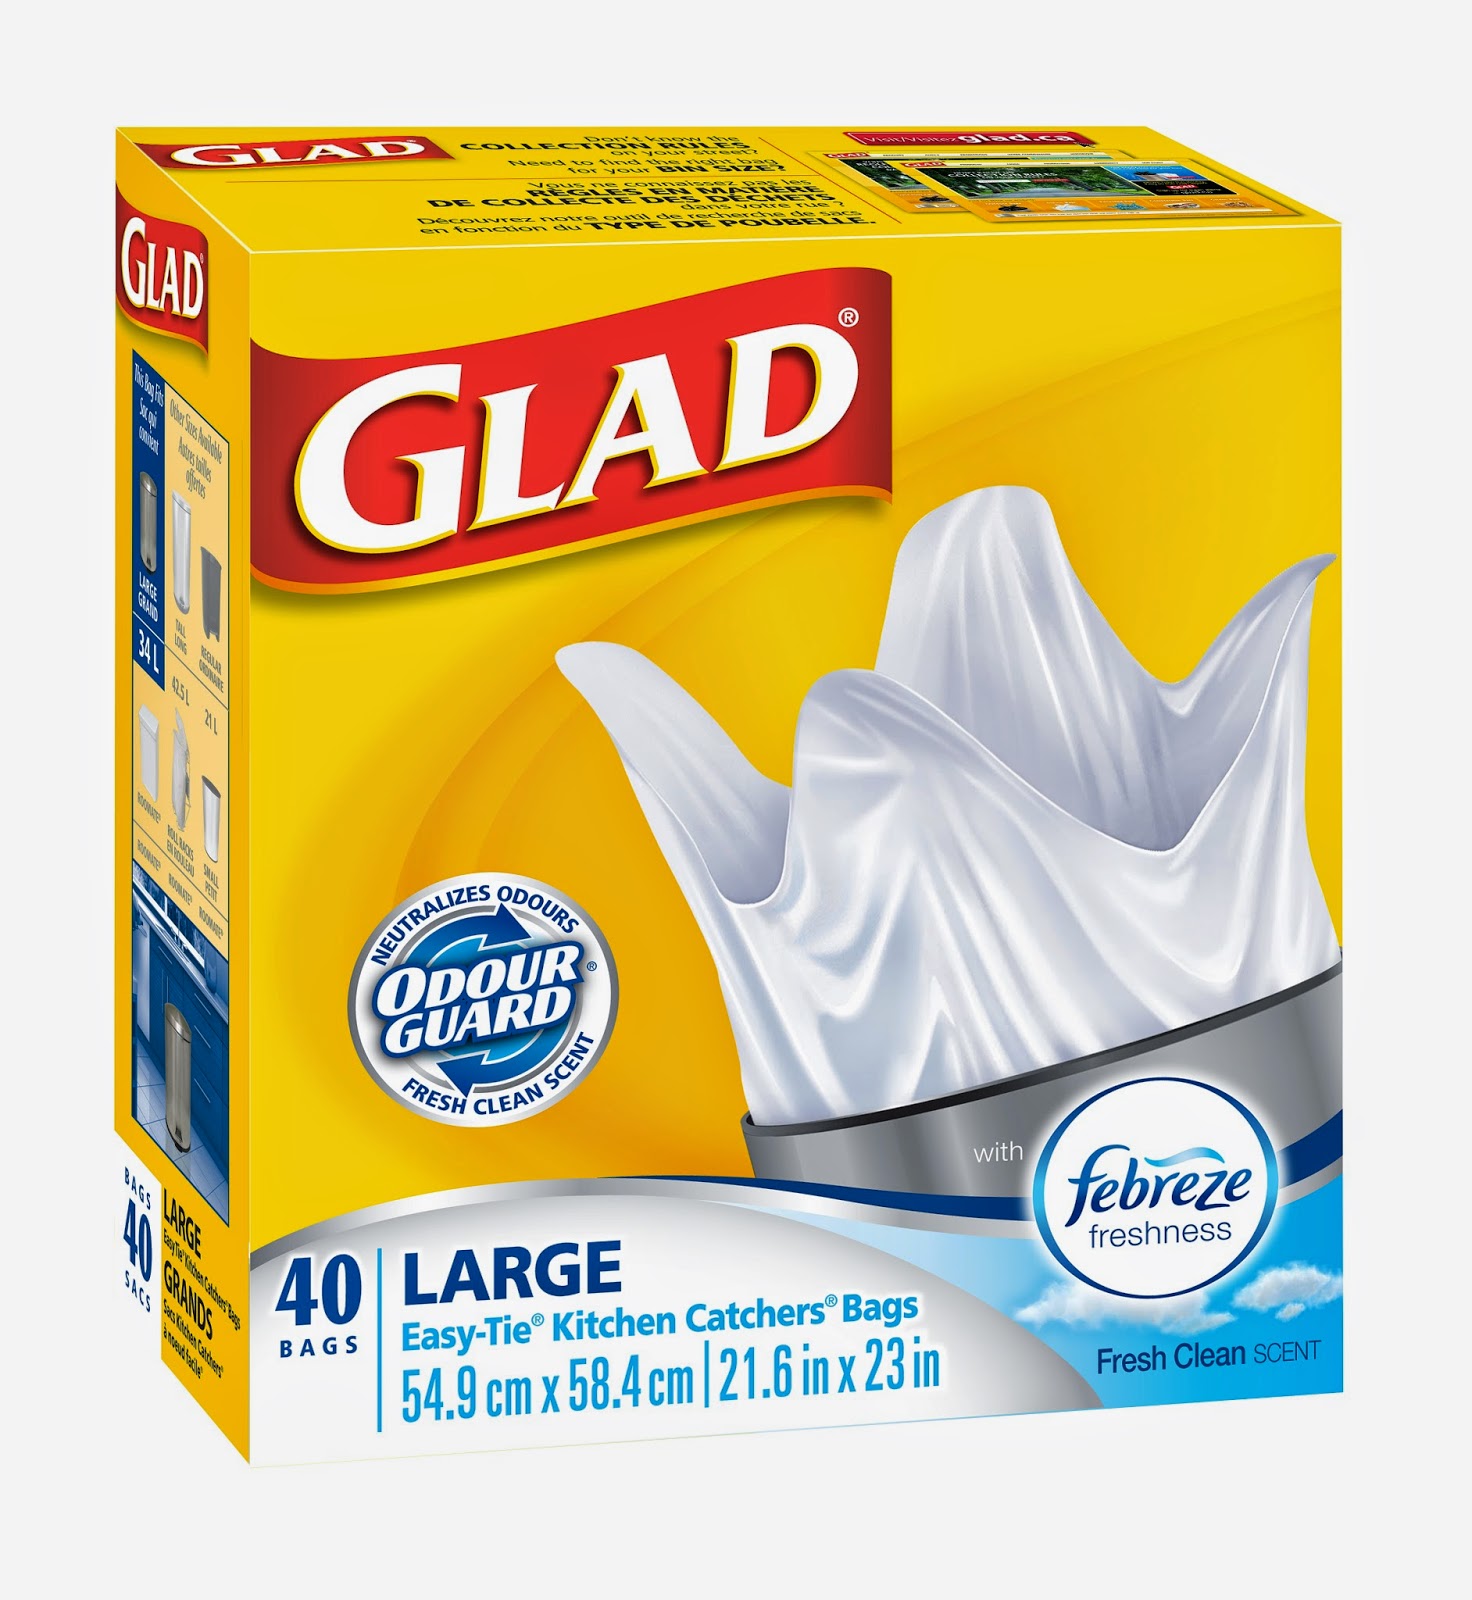 CHRISTMAS PARTY CHEATS WITH GLAD ODOUR GUARD - Life Without Lemons